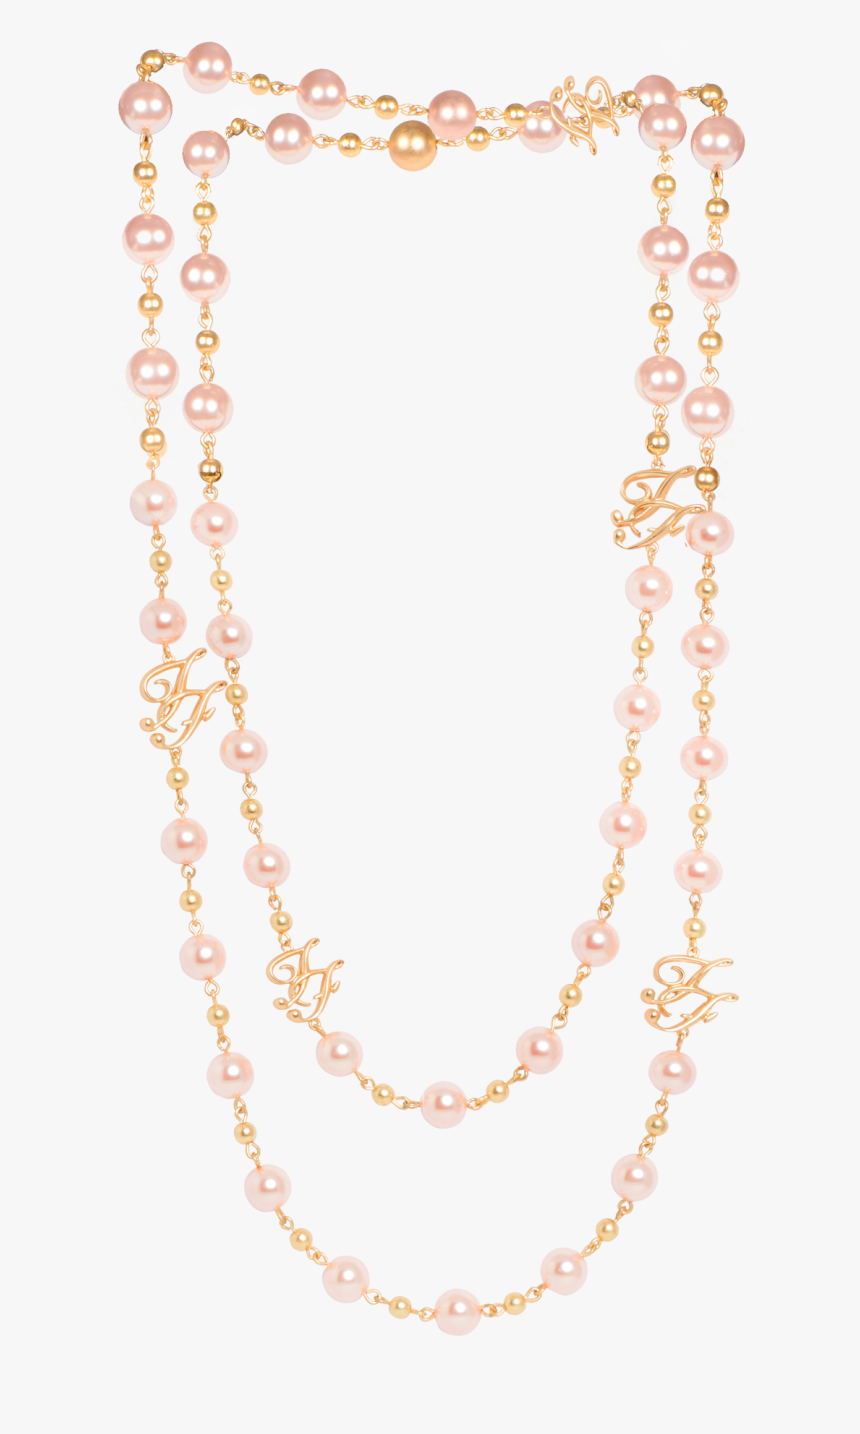 Pink Pearl Necklace &amp; Bracelet With Faux Pearls - Necklace